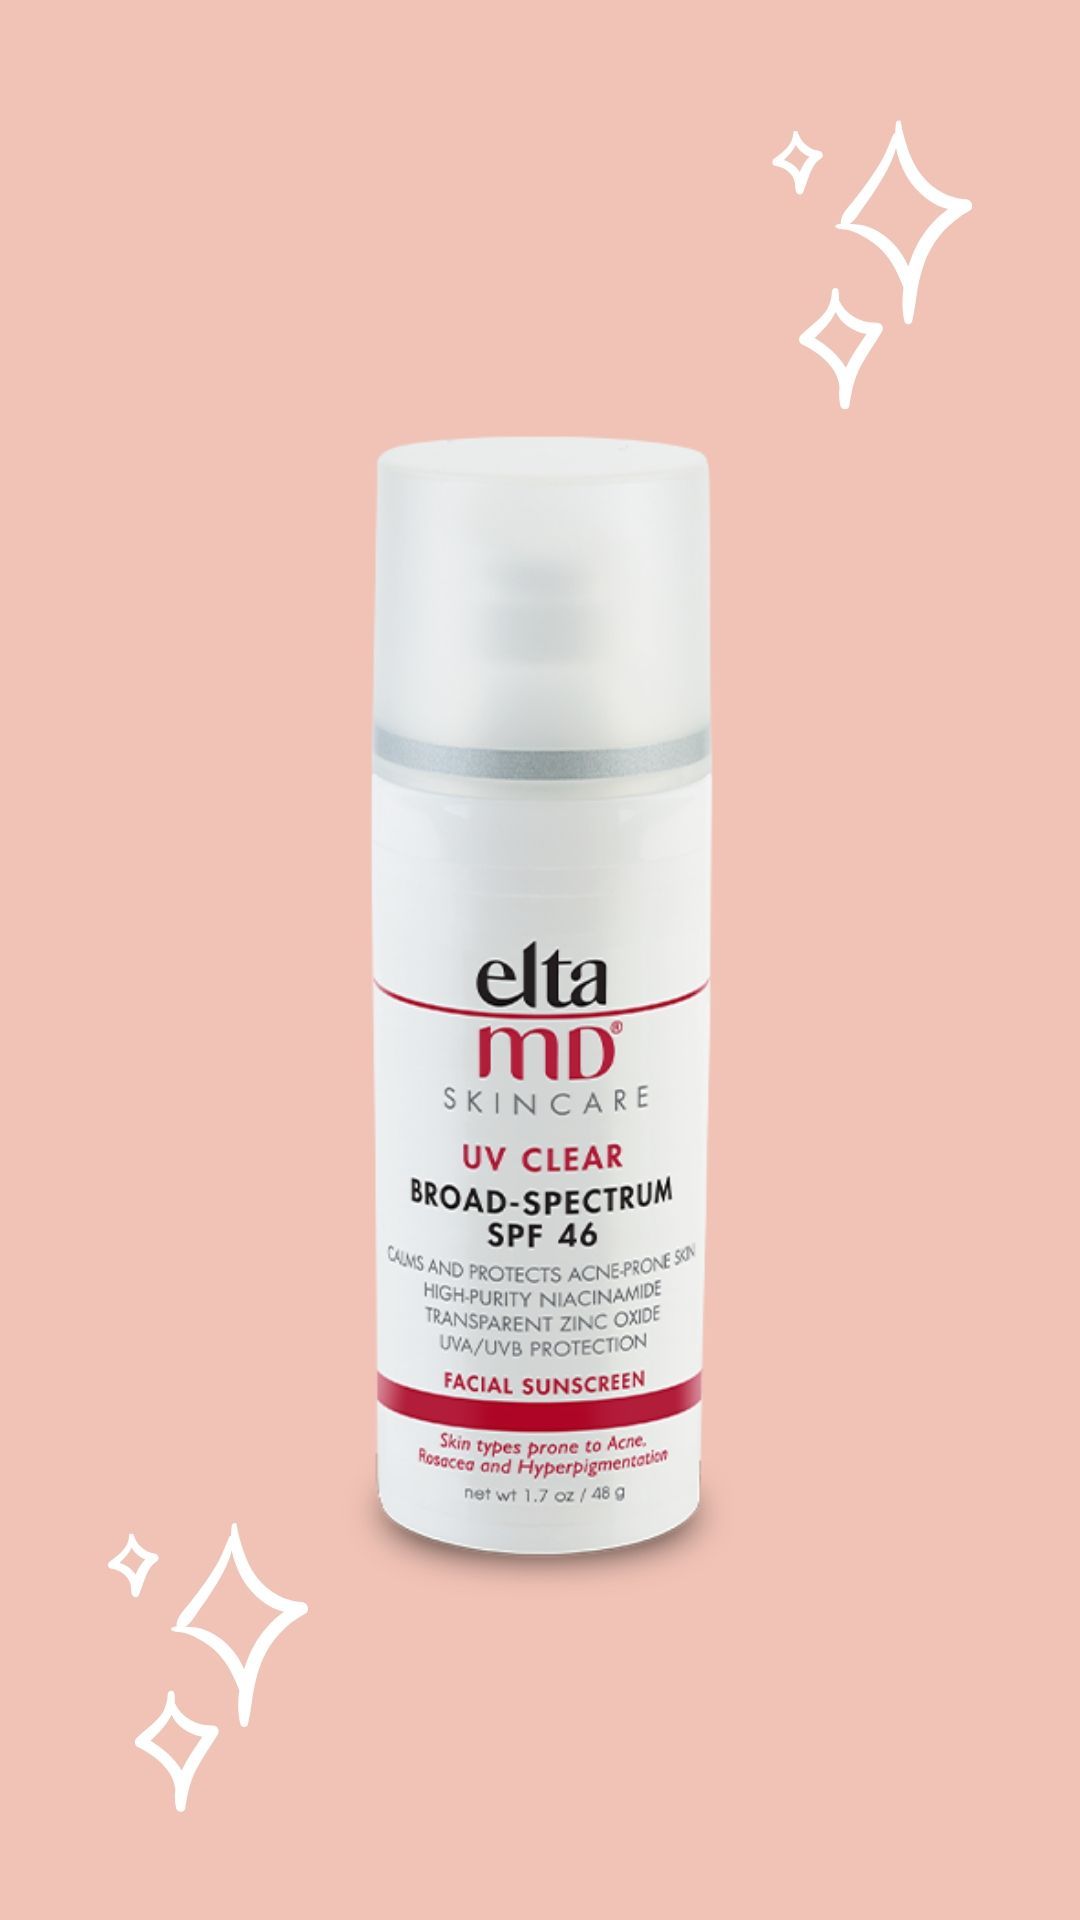 Elta MD Sunscreen, pink background with sparkles